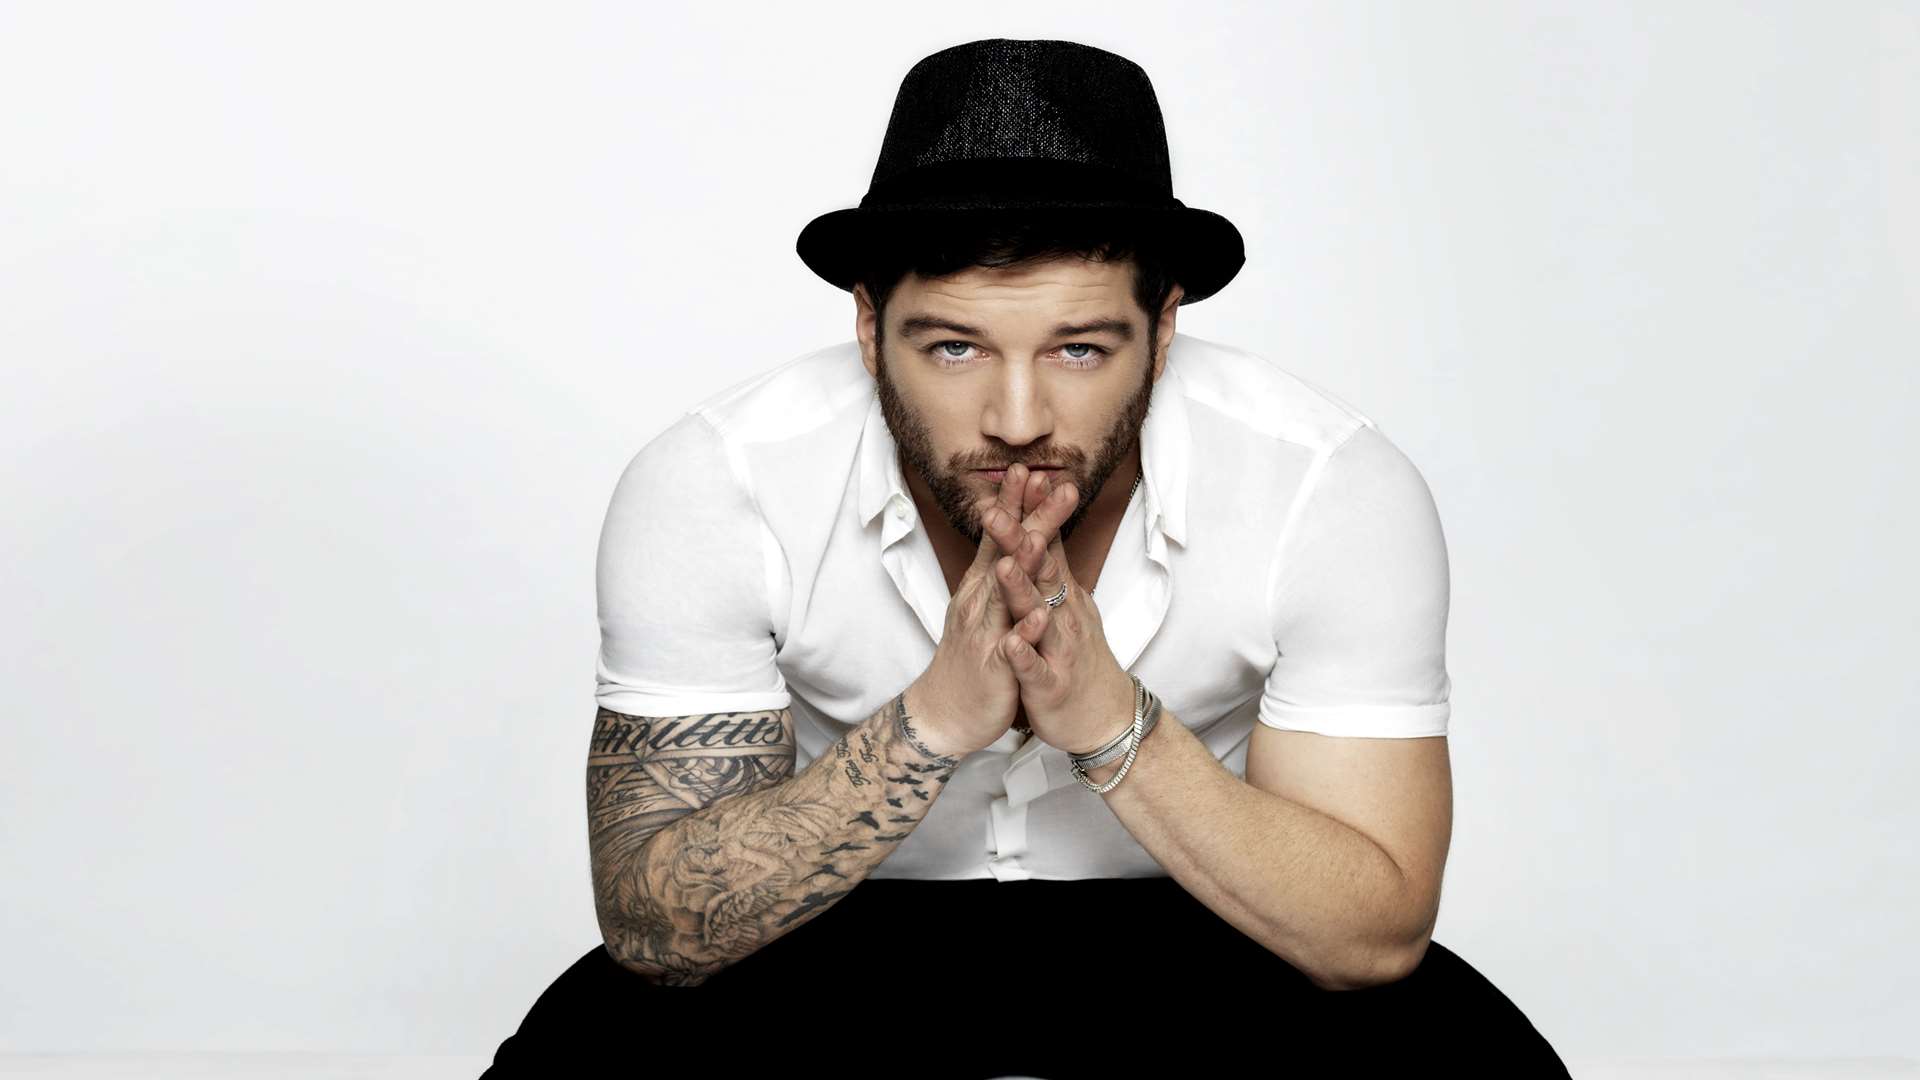 Matt Cardle's tour is "Intimate and Live"